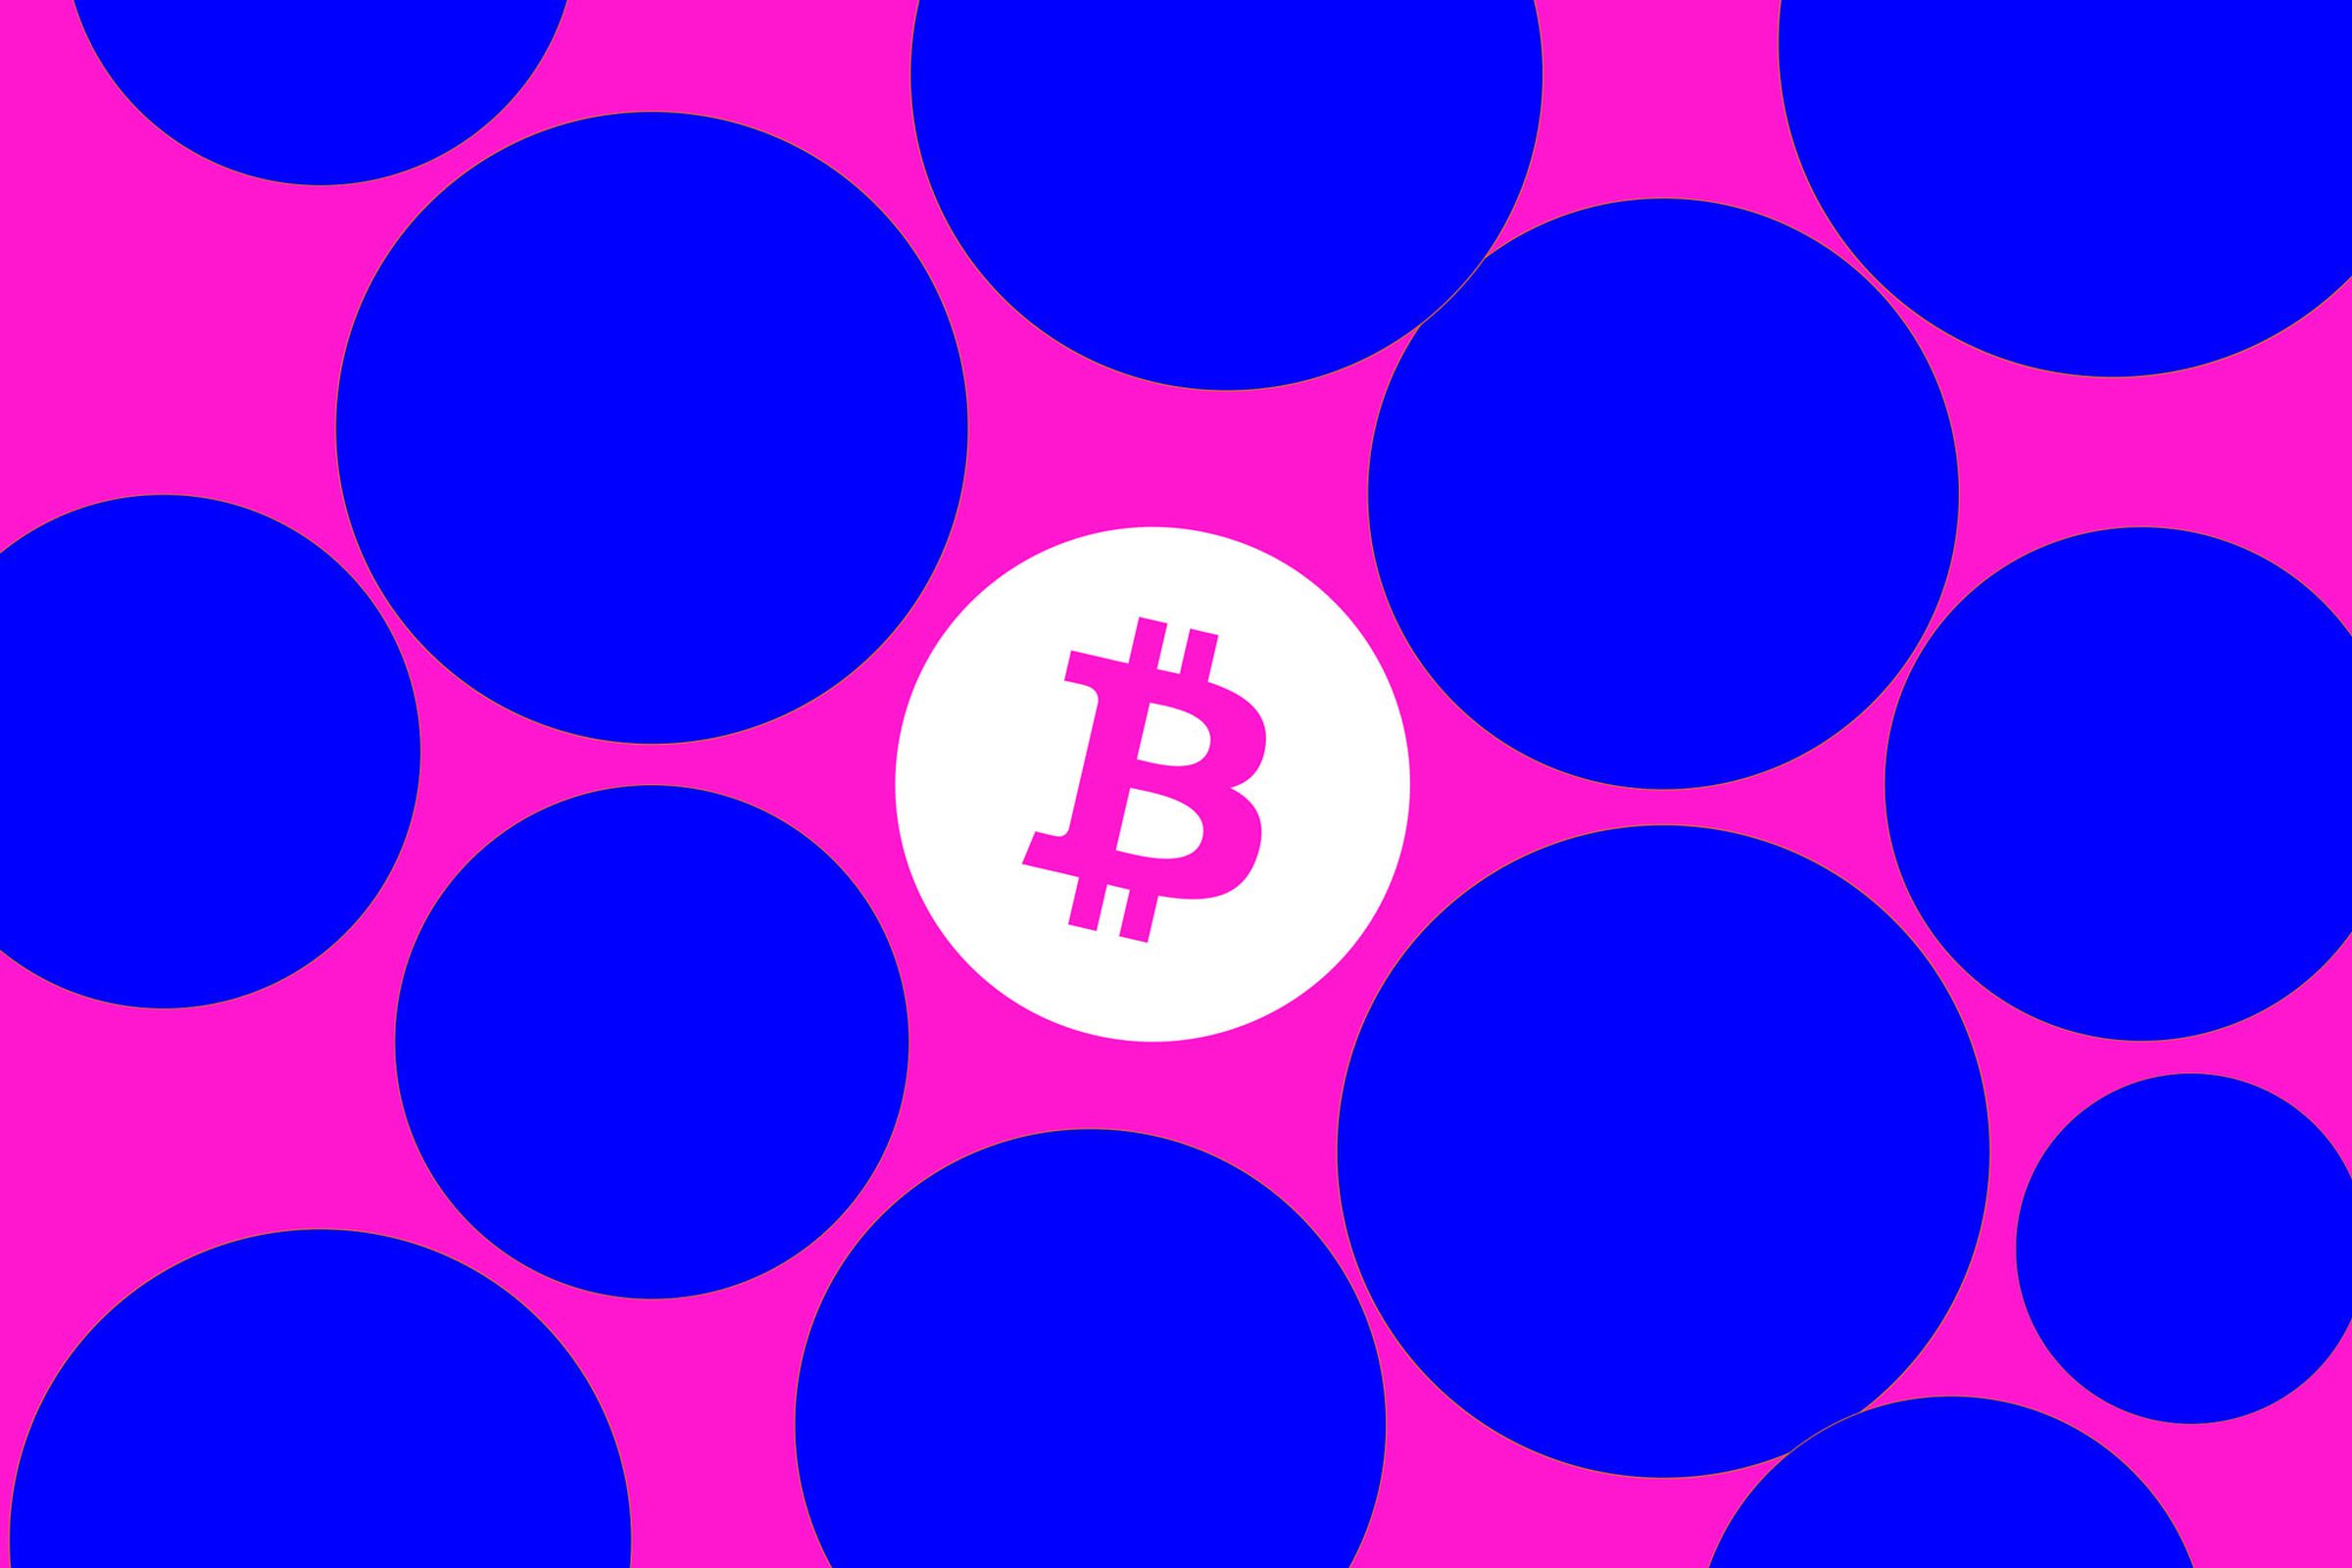 An image showing the Bitcoin logo surrounded by purple circles